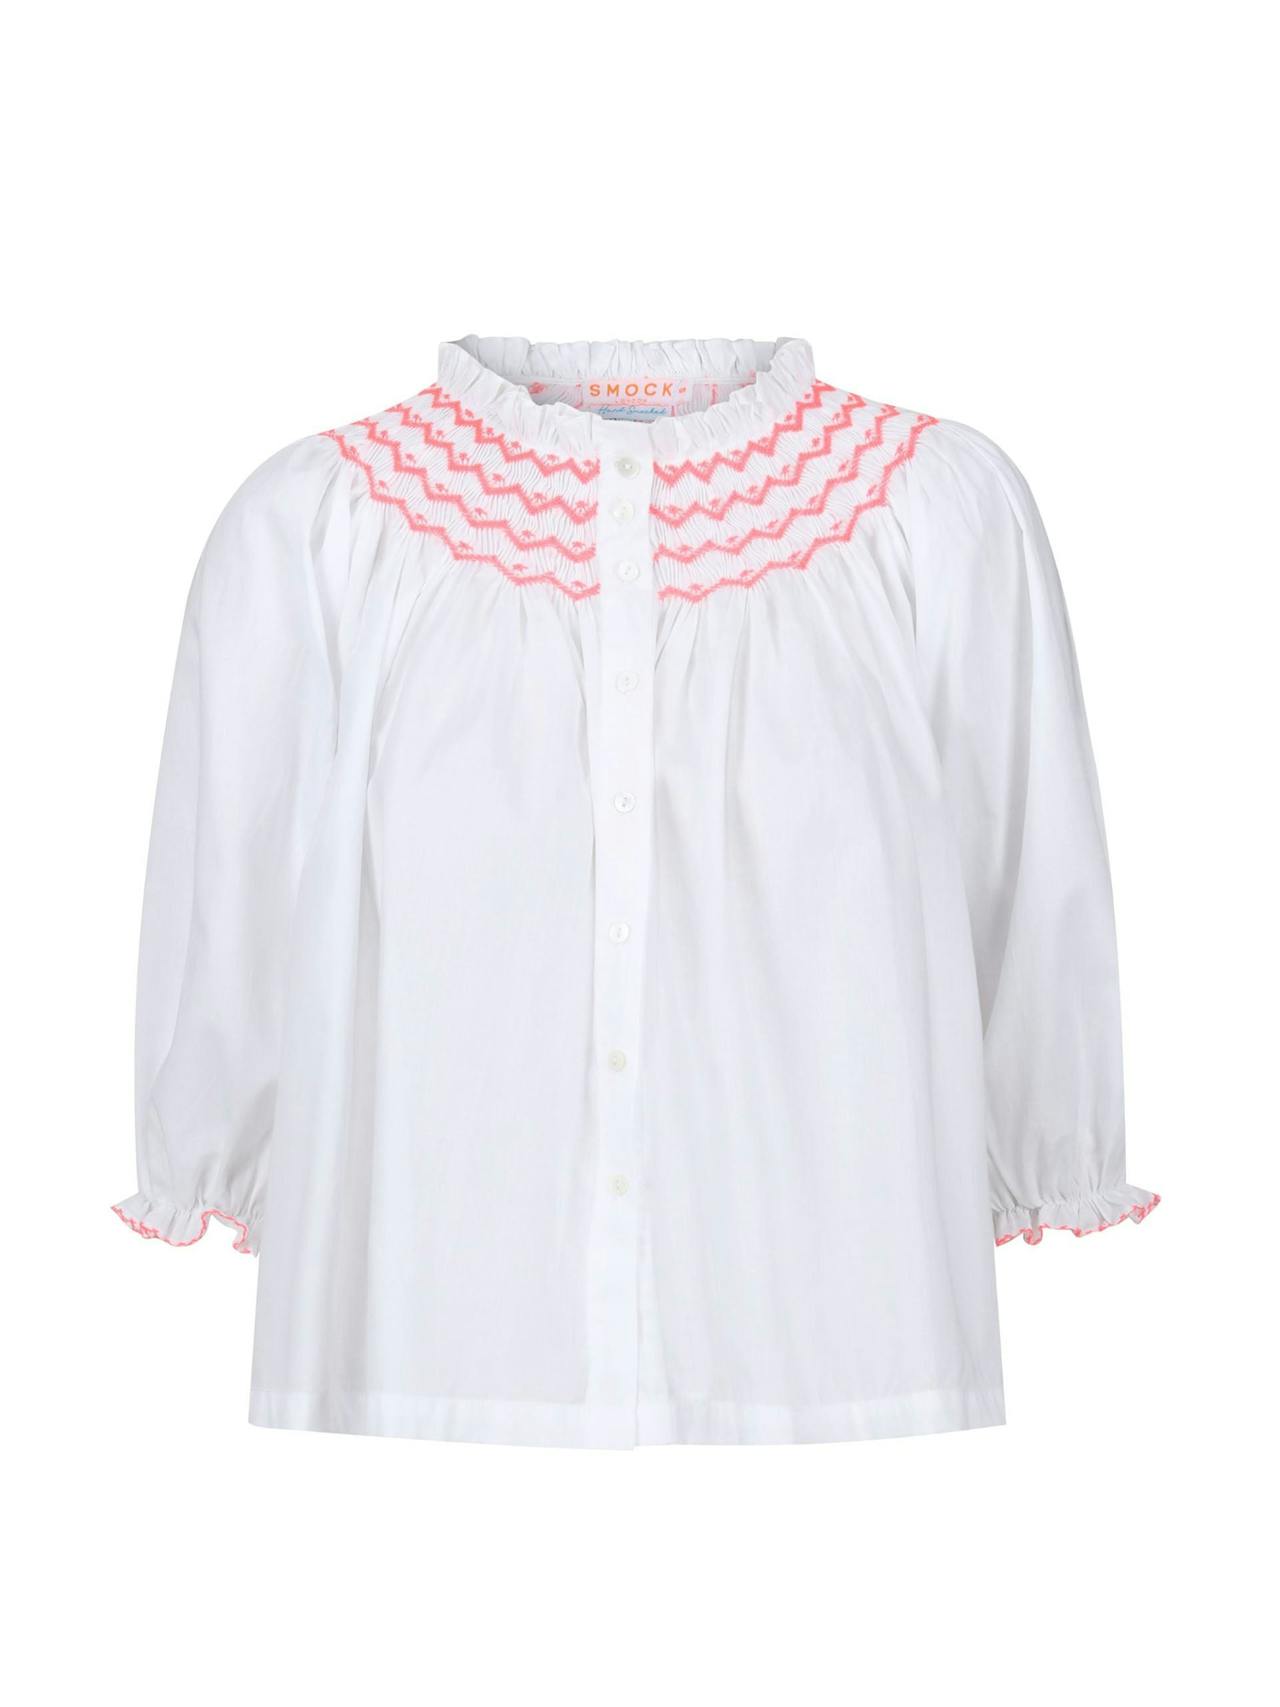 Cleopatra blouse white with sour watermelon hand smocking edition 9